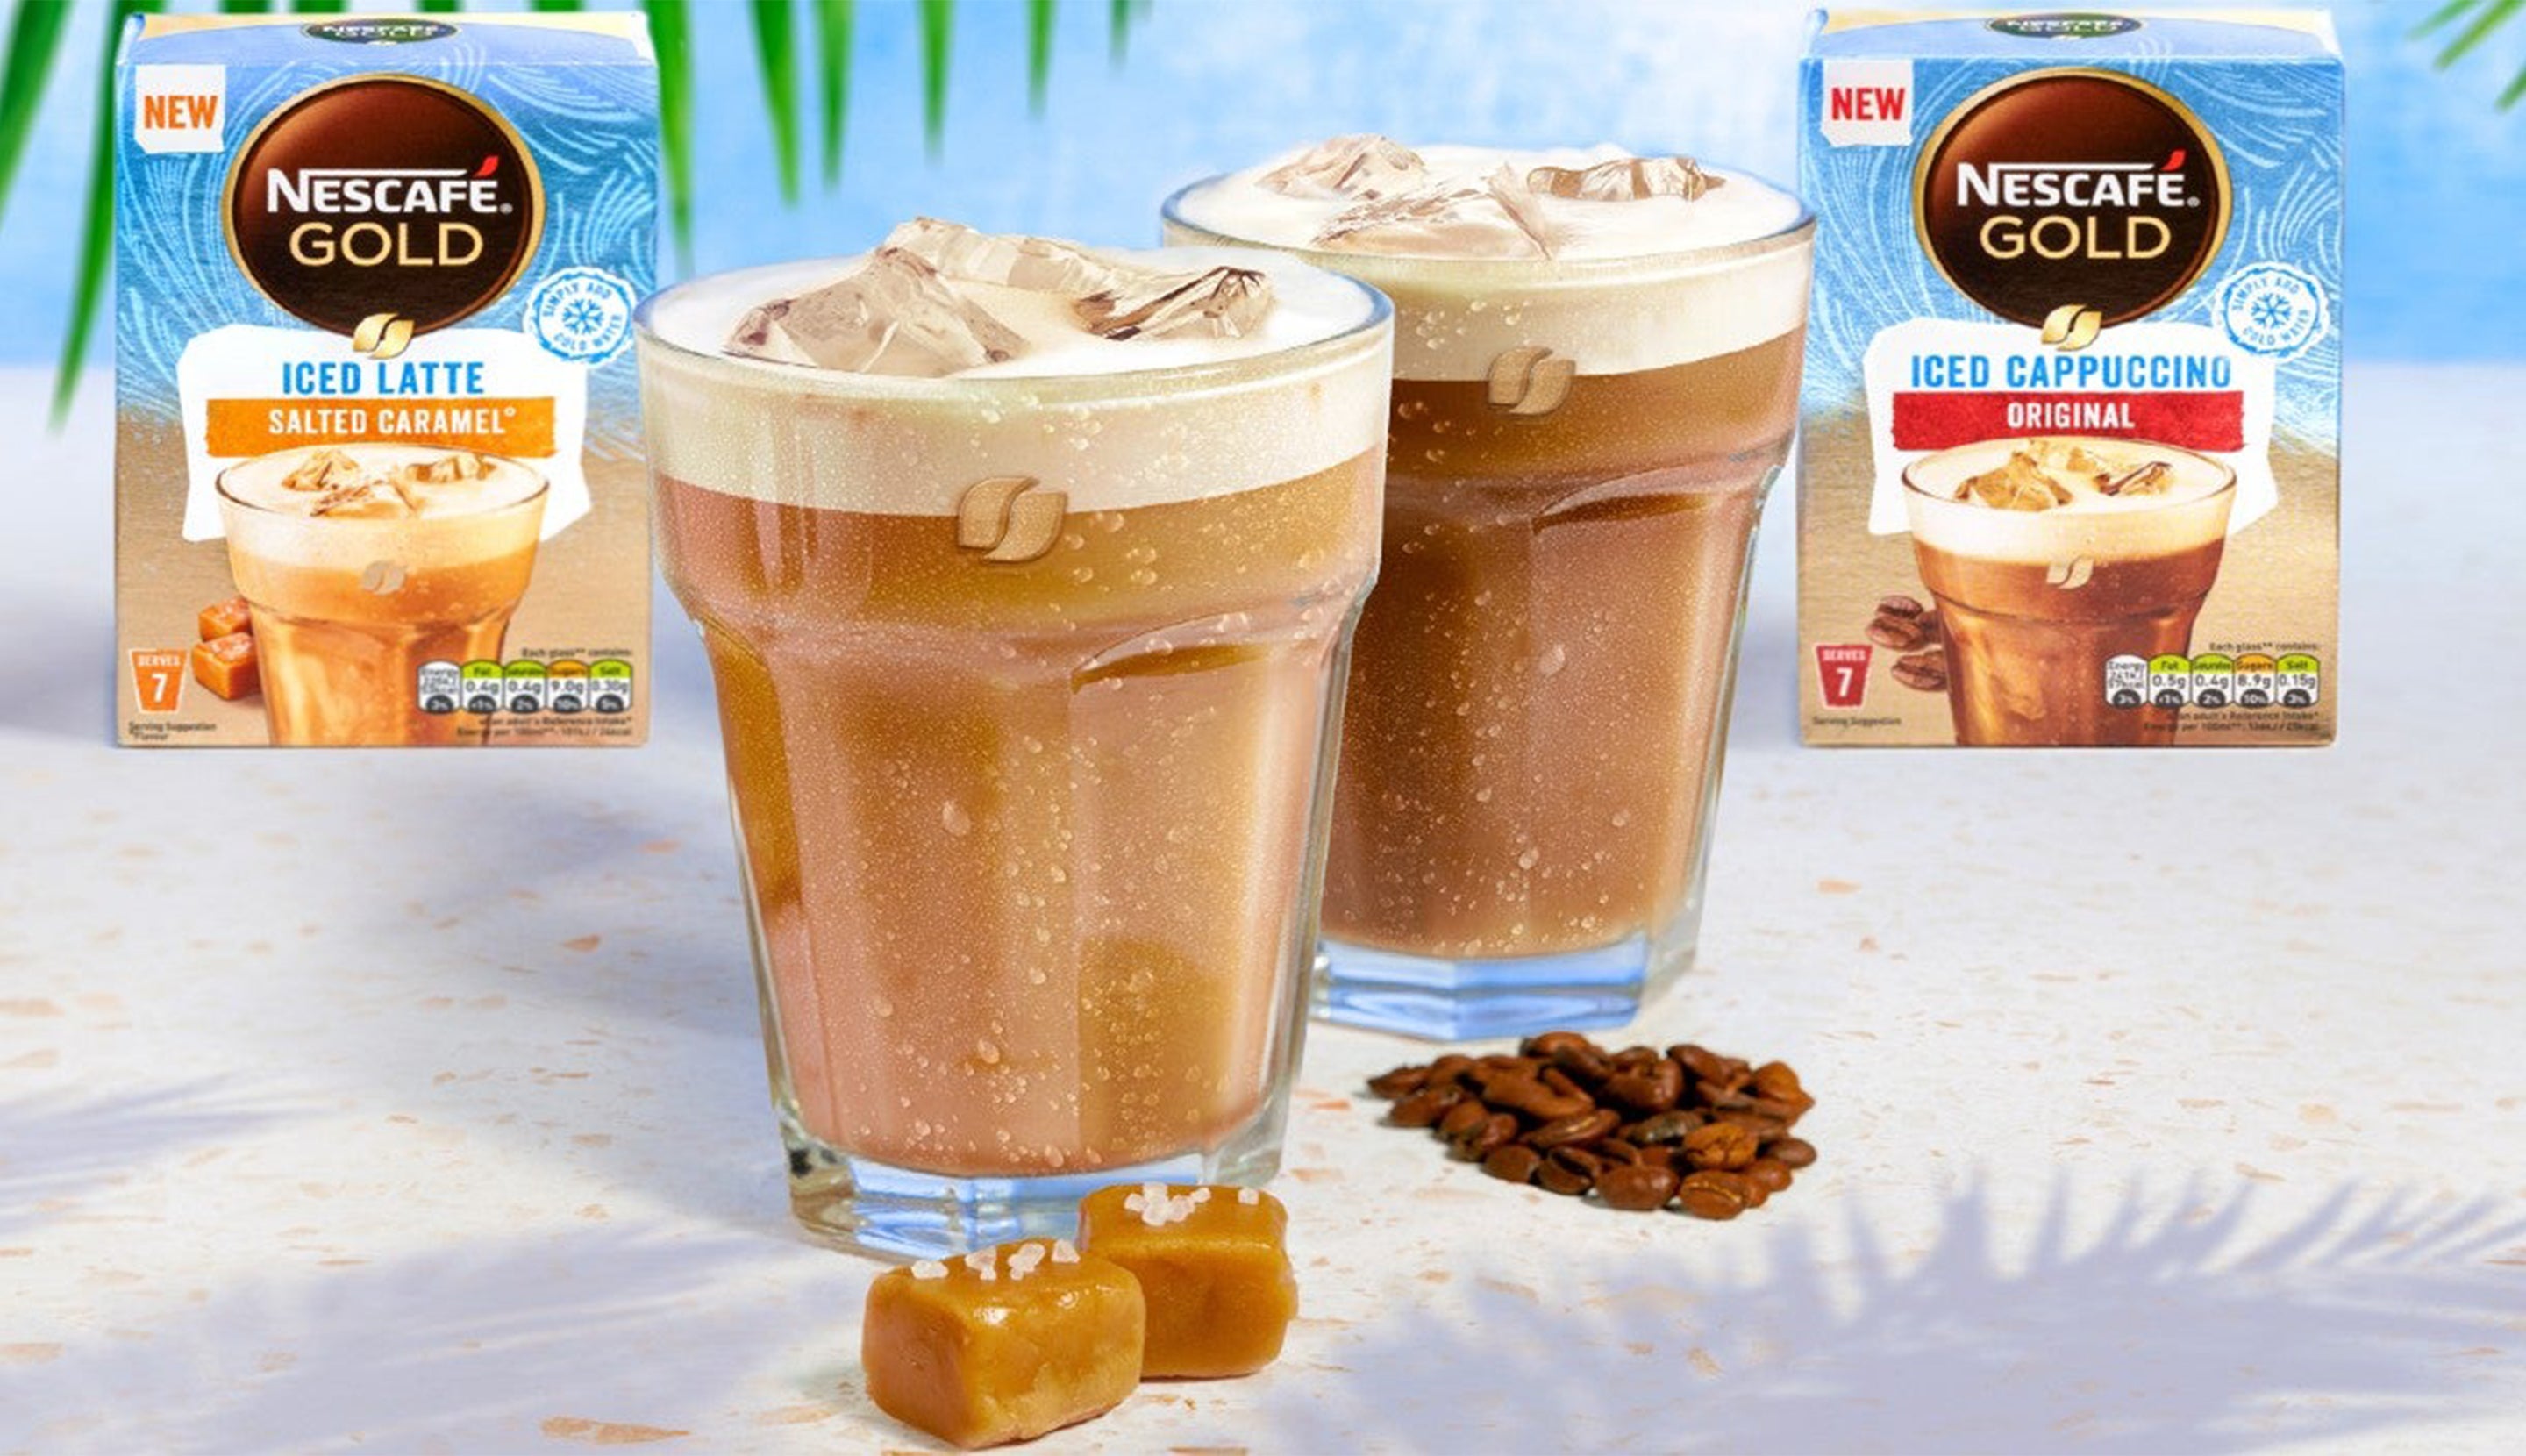 Introducing our NESCAFÉ GOLD Iced Coffee Range